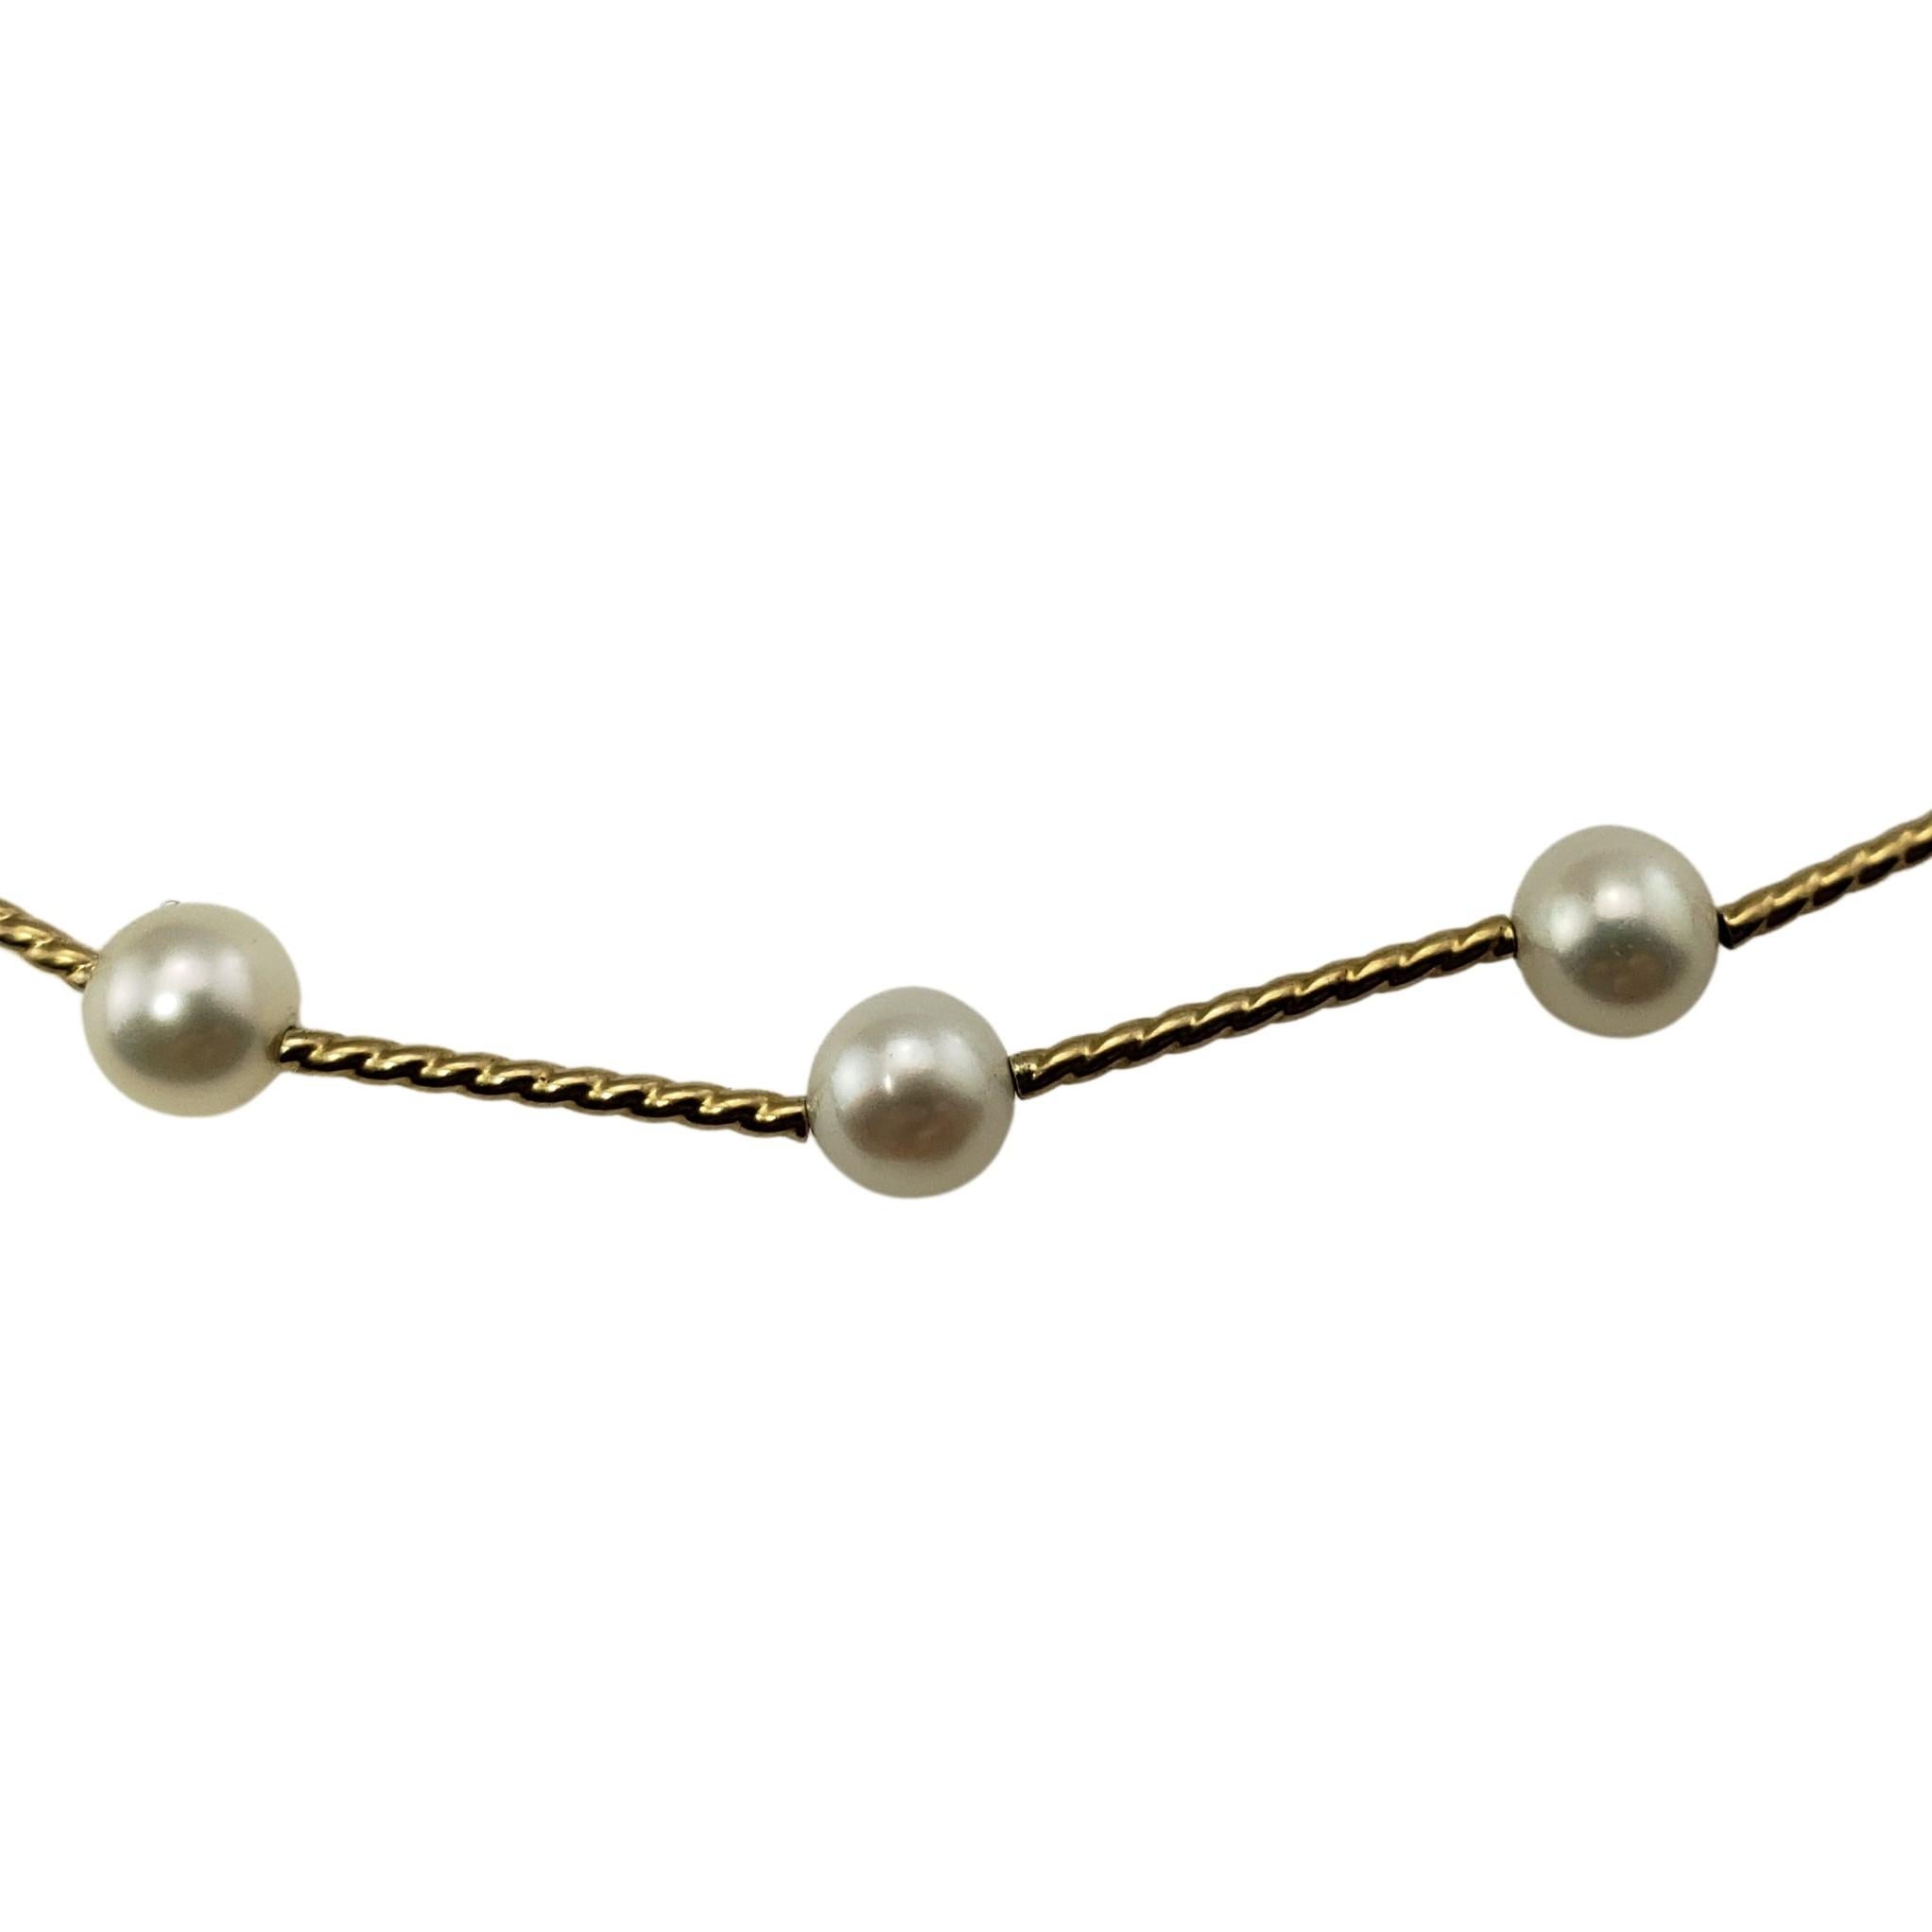 14 Karat Yellow Gold and Pearl Necklace-

This elegant necklace features 26 round white pearls (5 mm each) set on 14K yellow gold.

Size: 17.5 inches

Weight:  4.1 dwt. /  6.5 gr.

Stamped: 14K 

Very good condition, professionally polished.

Will